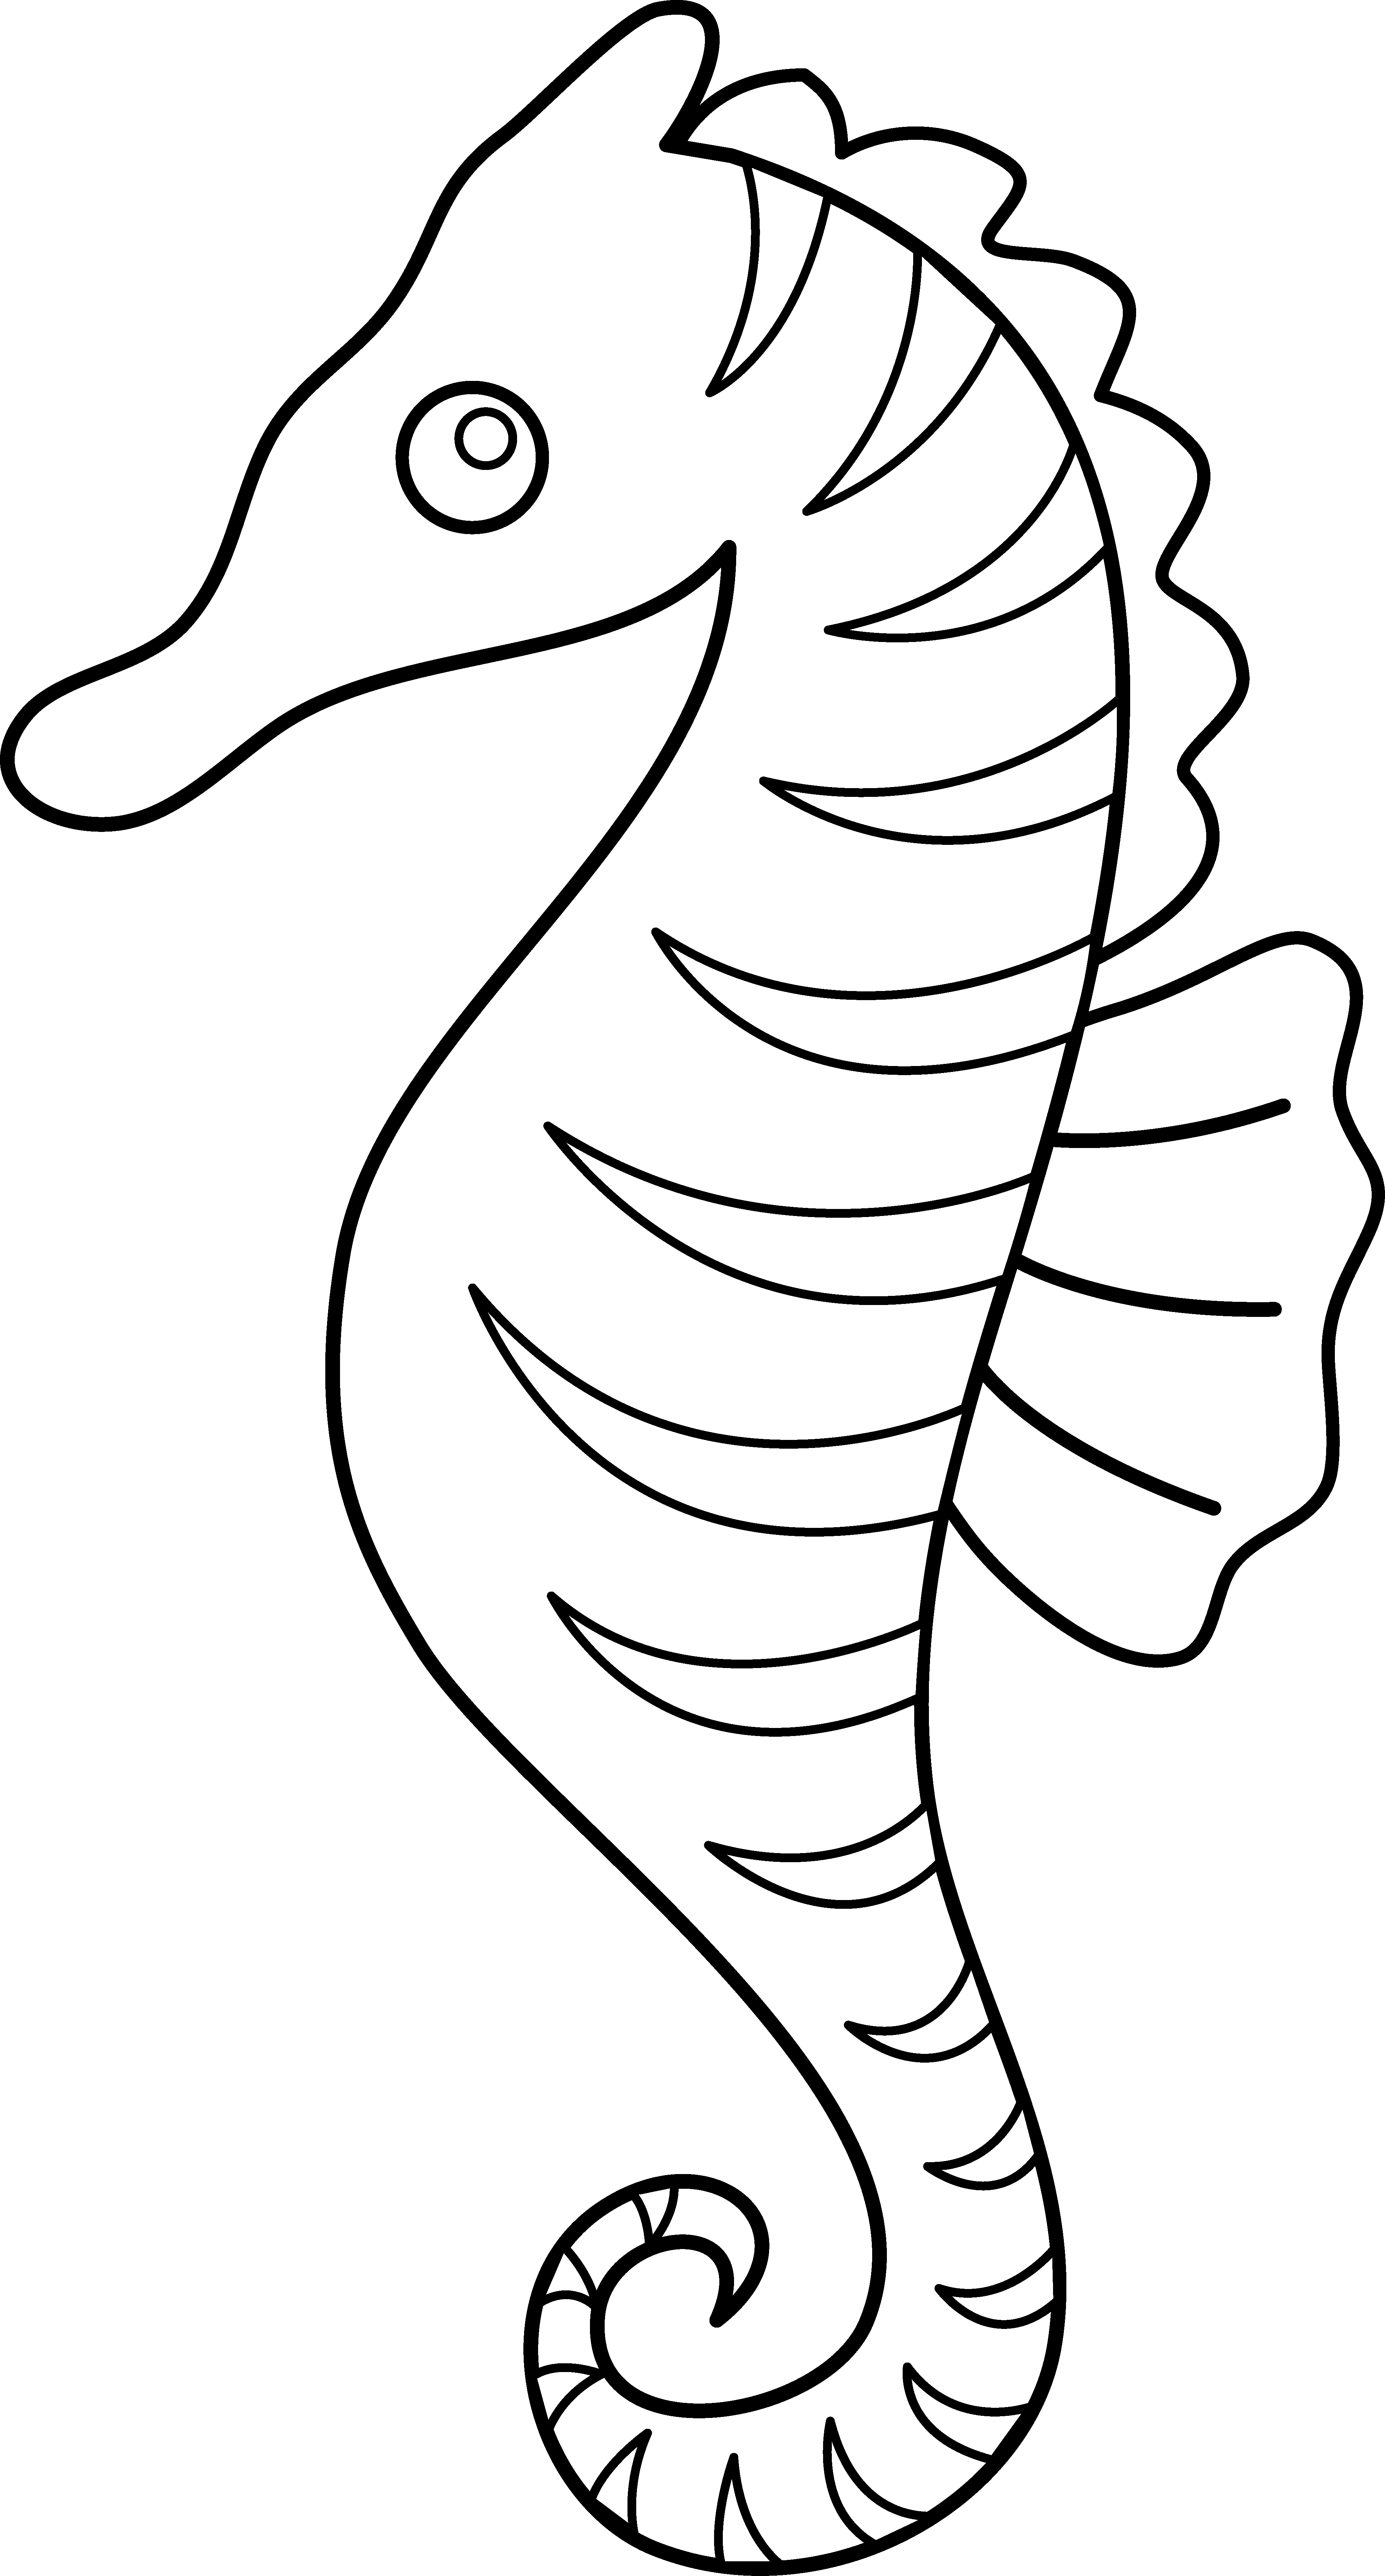 Free Sea Horse Outline, Download Free Sea Horse Outline png images